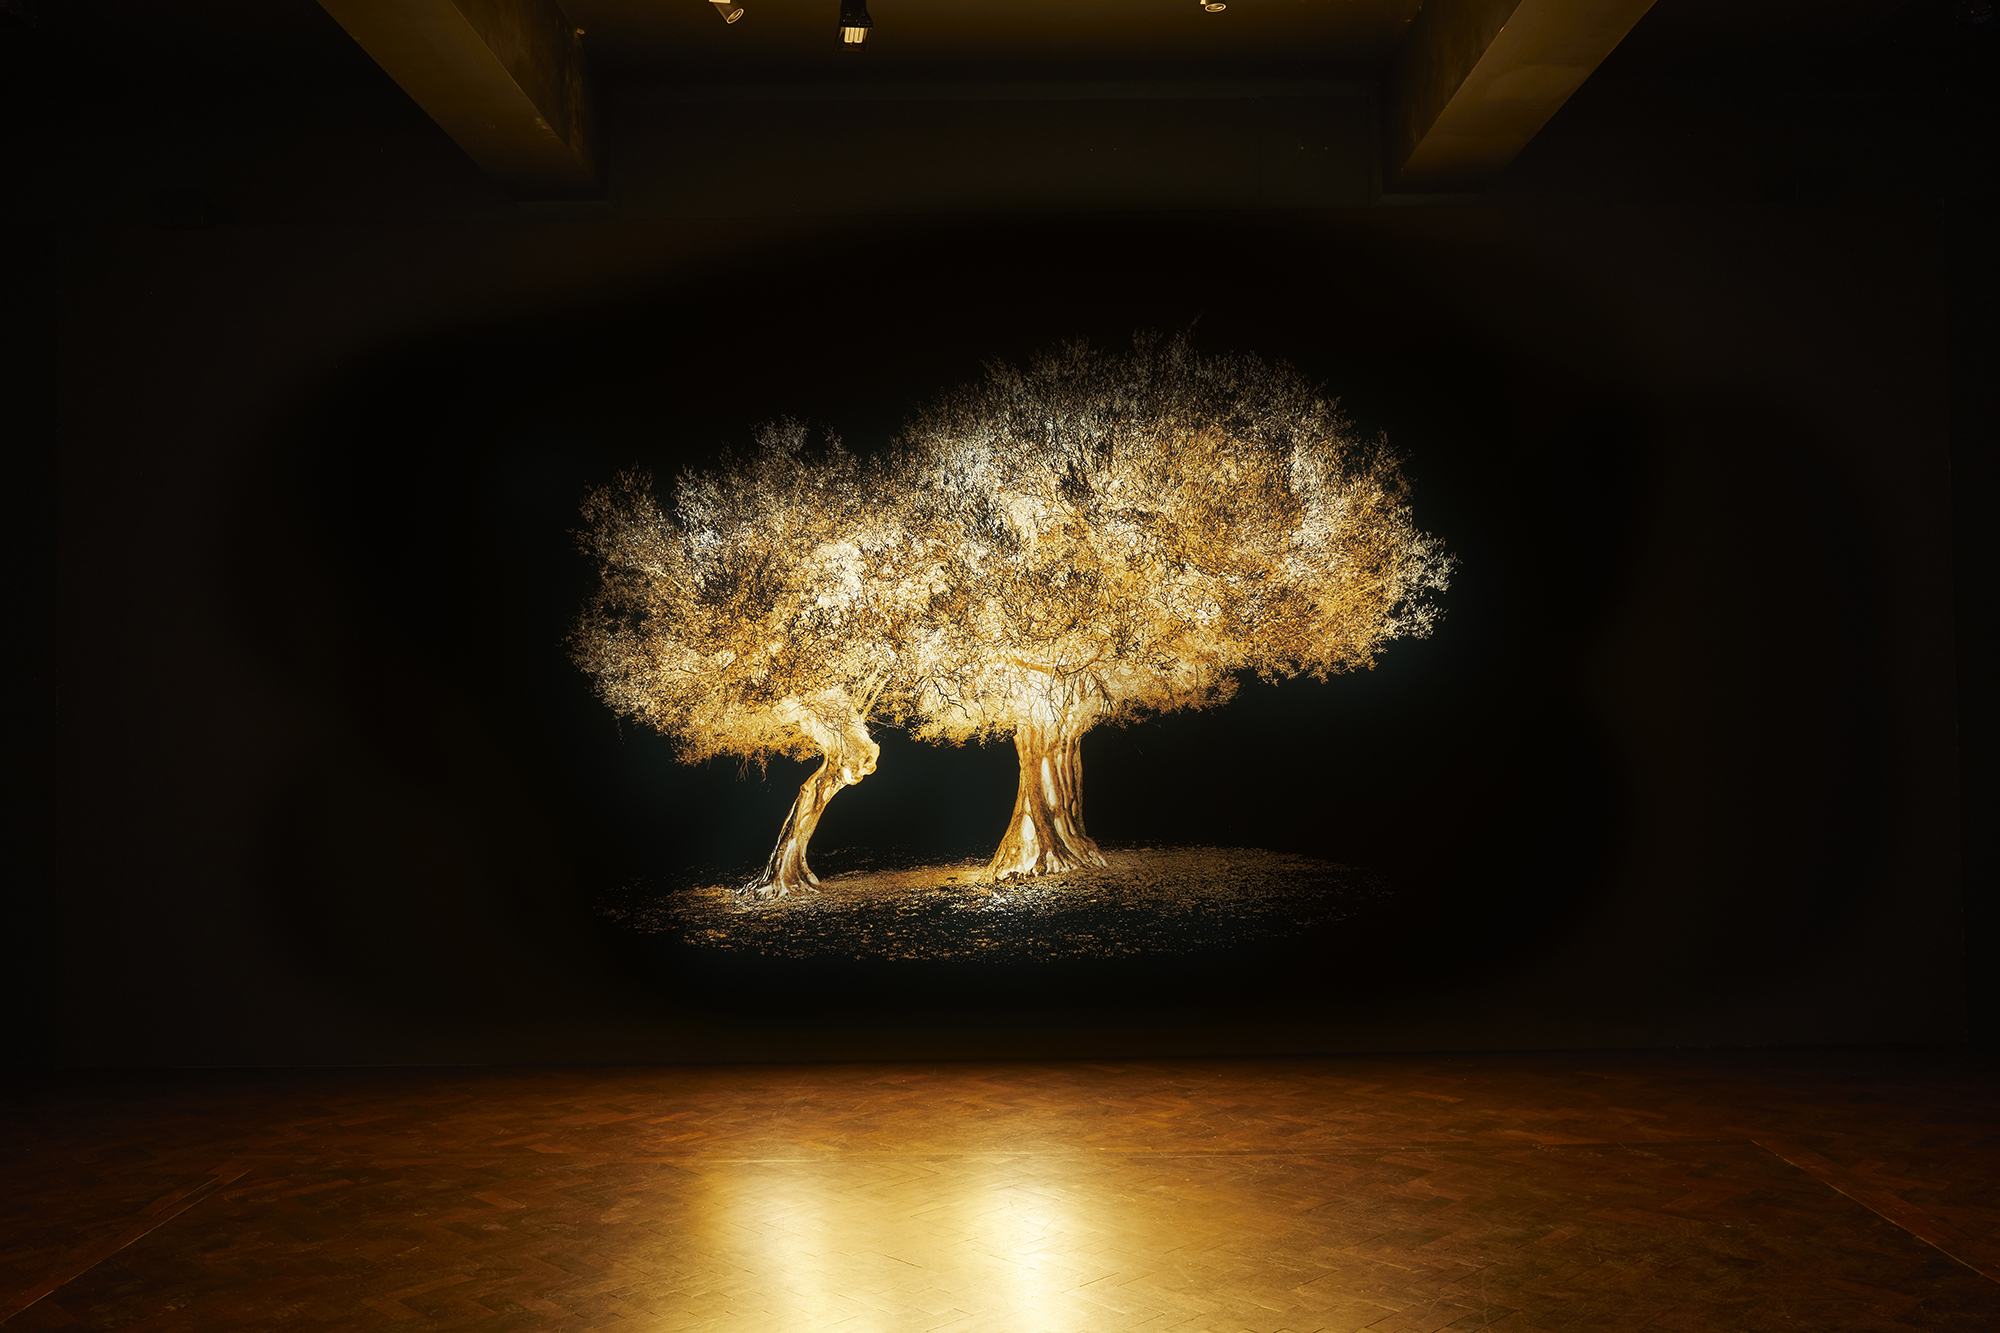 A photo of the Pavilion of Greece. It shows an image of a large glowing tree in a dark room.